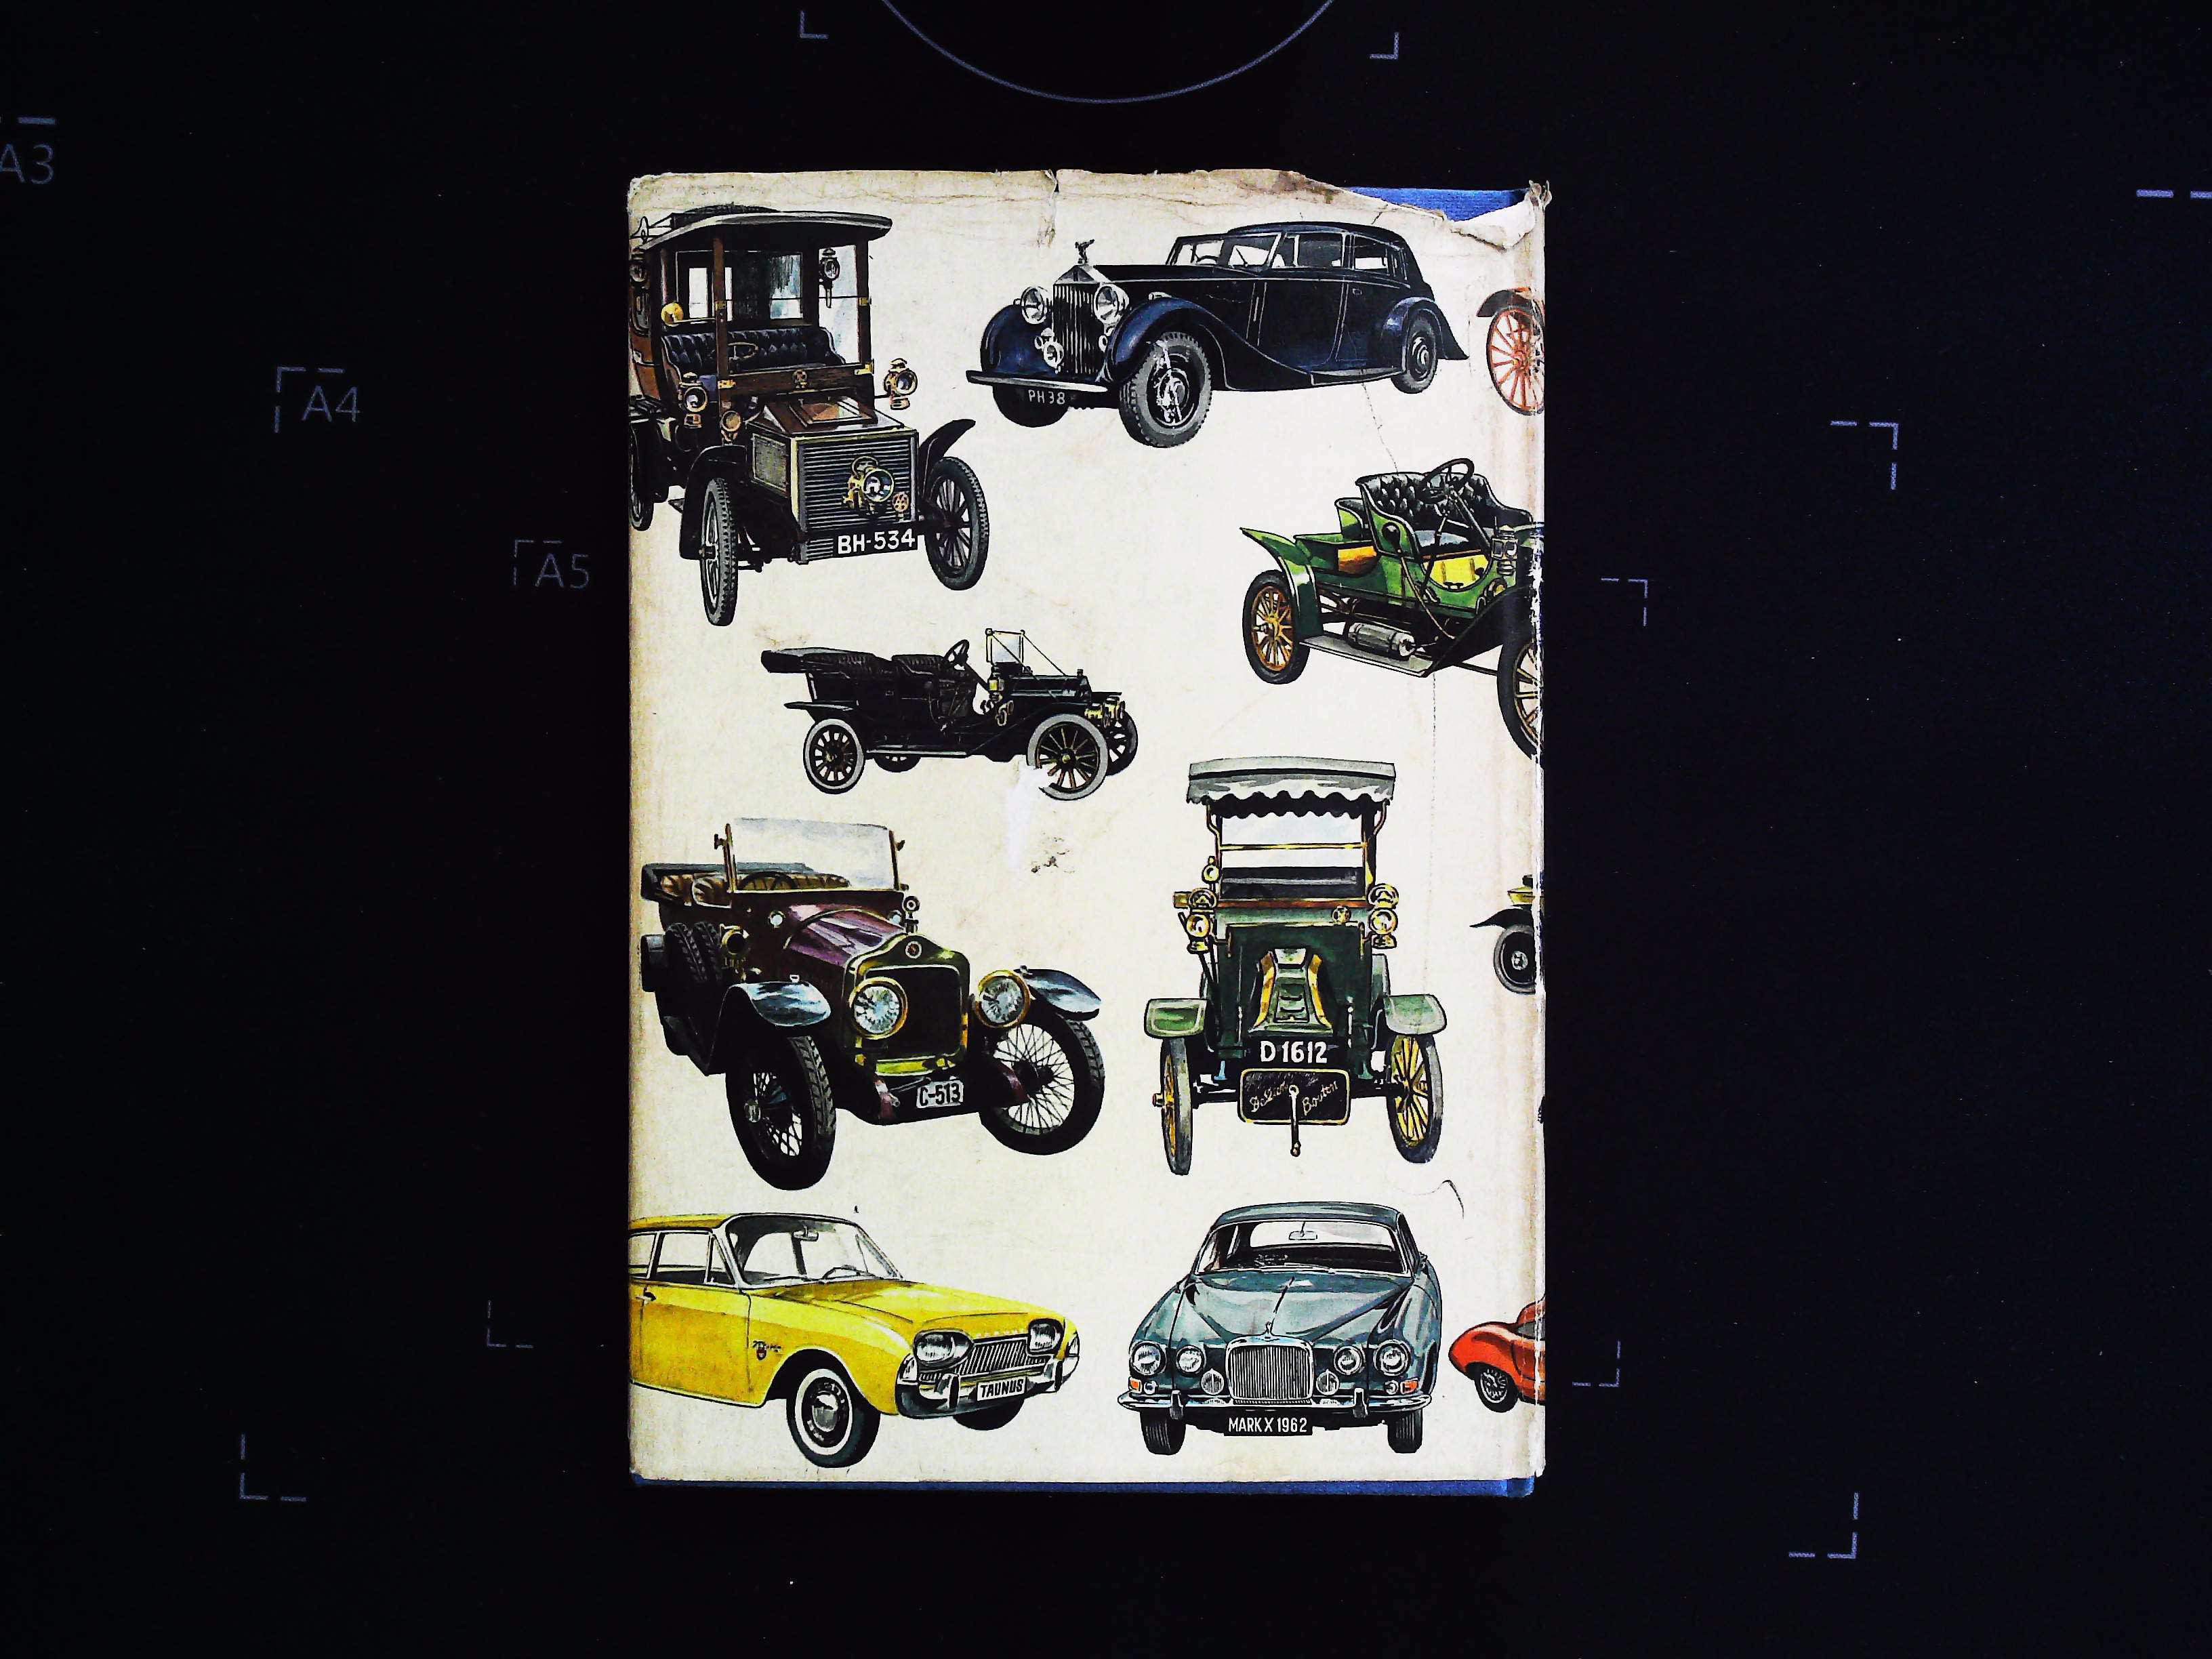 X 2 J. D. Scheel Cars Of The World hardback books Published 1963 Methuen And Co. Ltd. 1- In good - Image 5 of 6